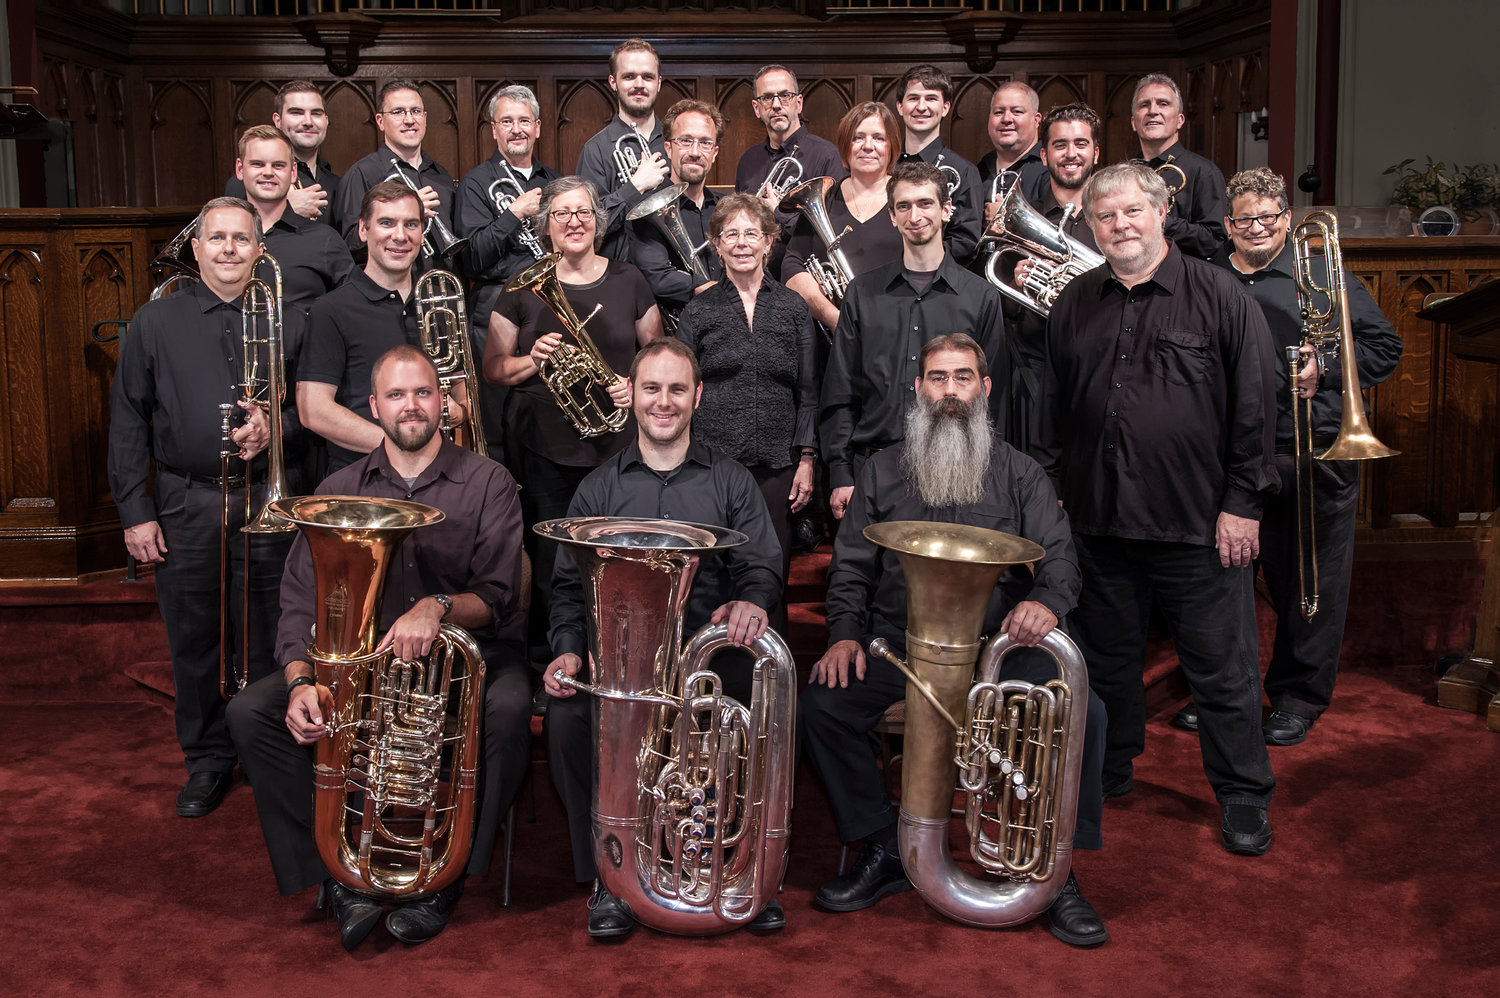 The Gramercy Brass Orchestra will open the 29th season of the Shandelee Music Festival on Saturday, August 6.